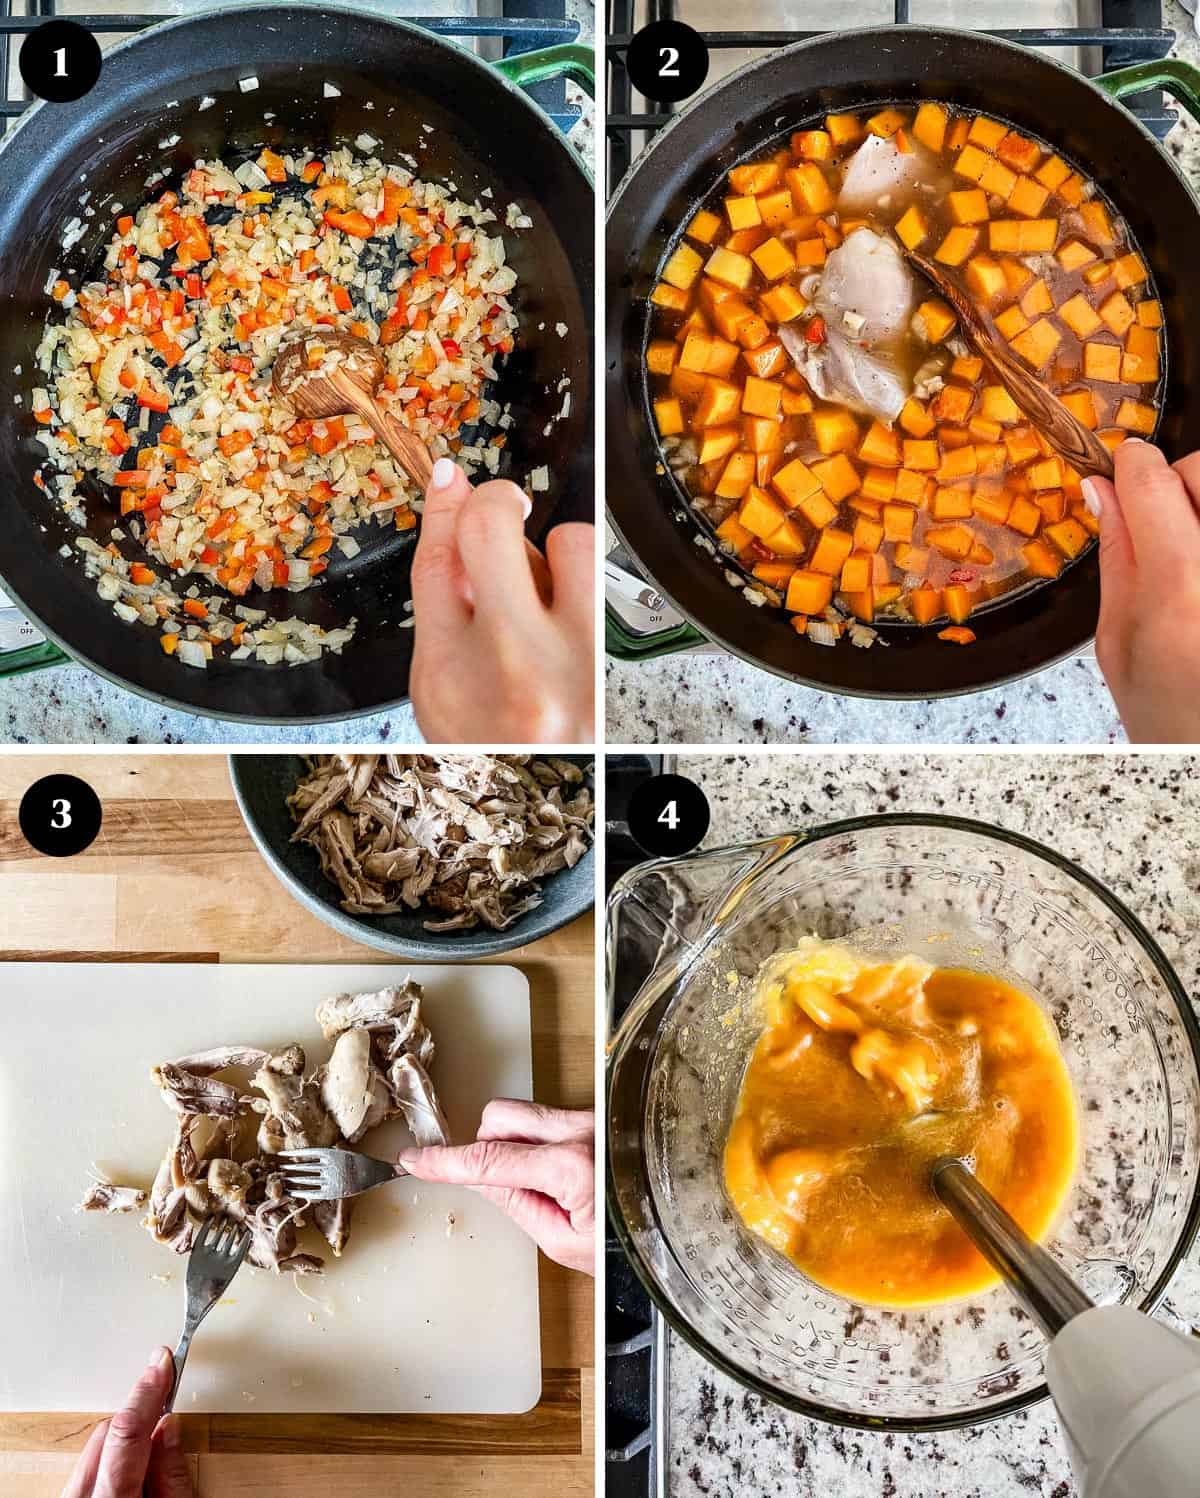 A collage of images showing how to make chicken and squash soup.